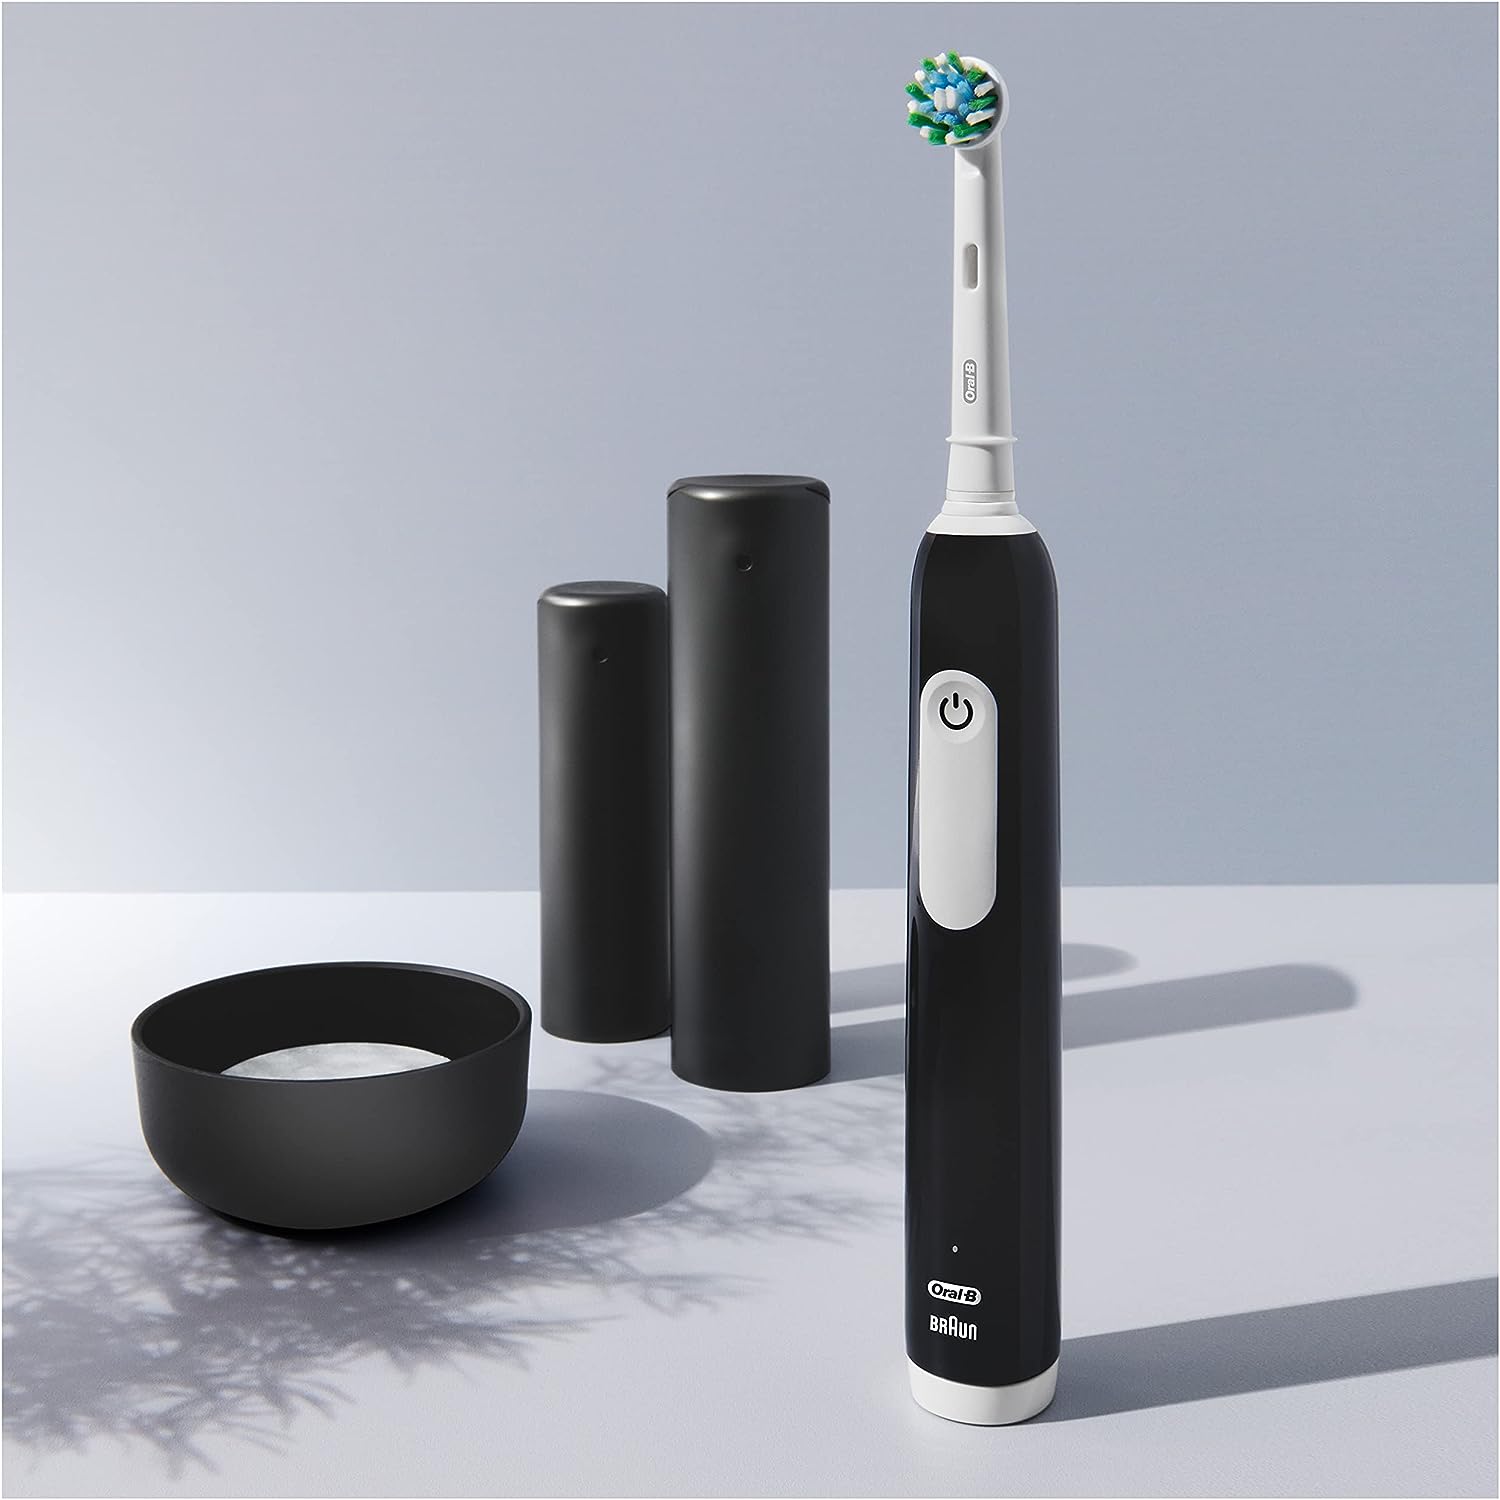 Oral-B Pro 1 Electric Toothbrush With 3D Cleaning, 1 Toothbrush Head & Pro-Expert Toothpaste, 75 ml - Black - Healthxpress.ie